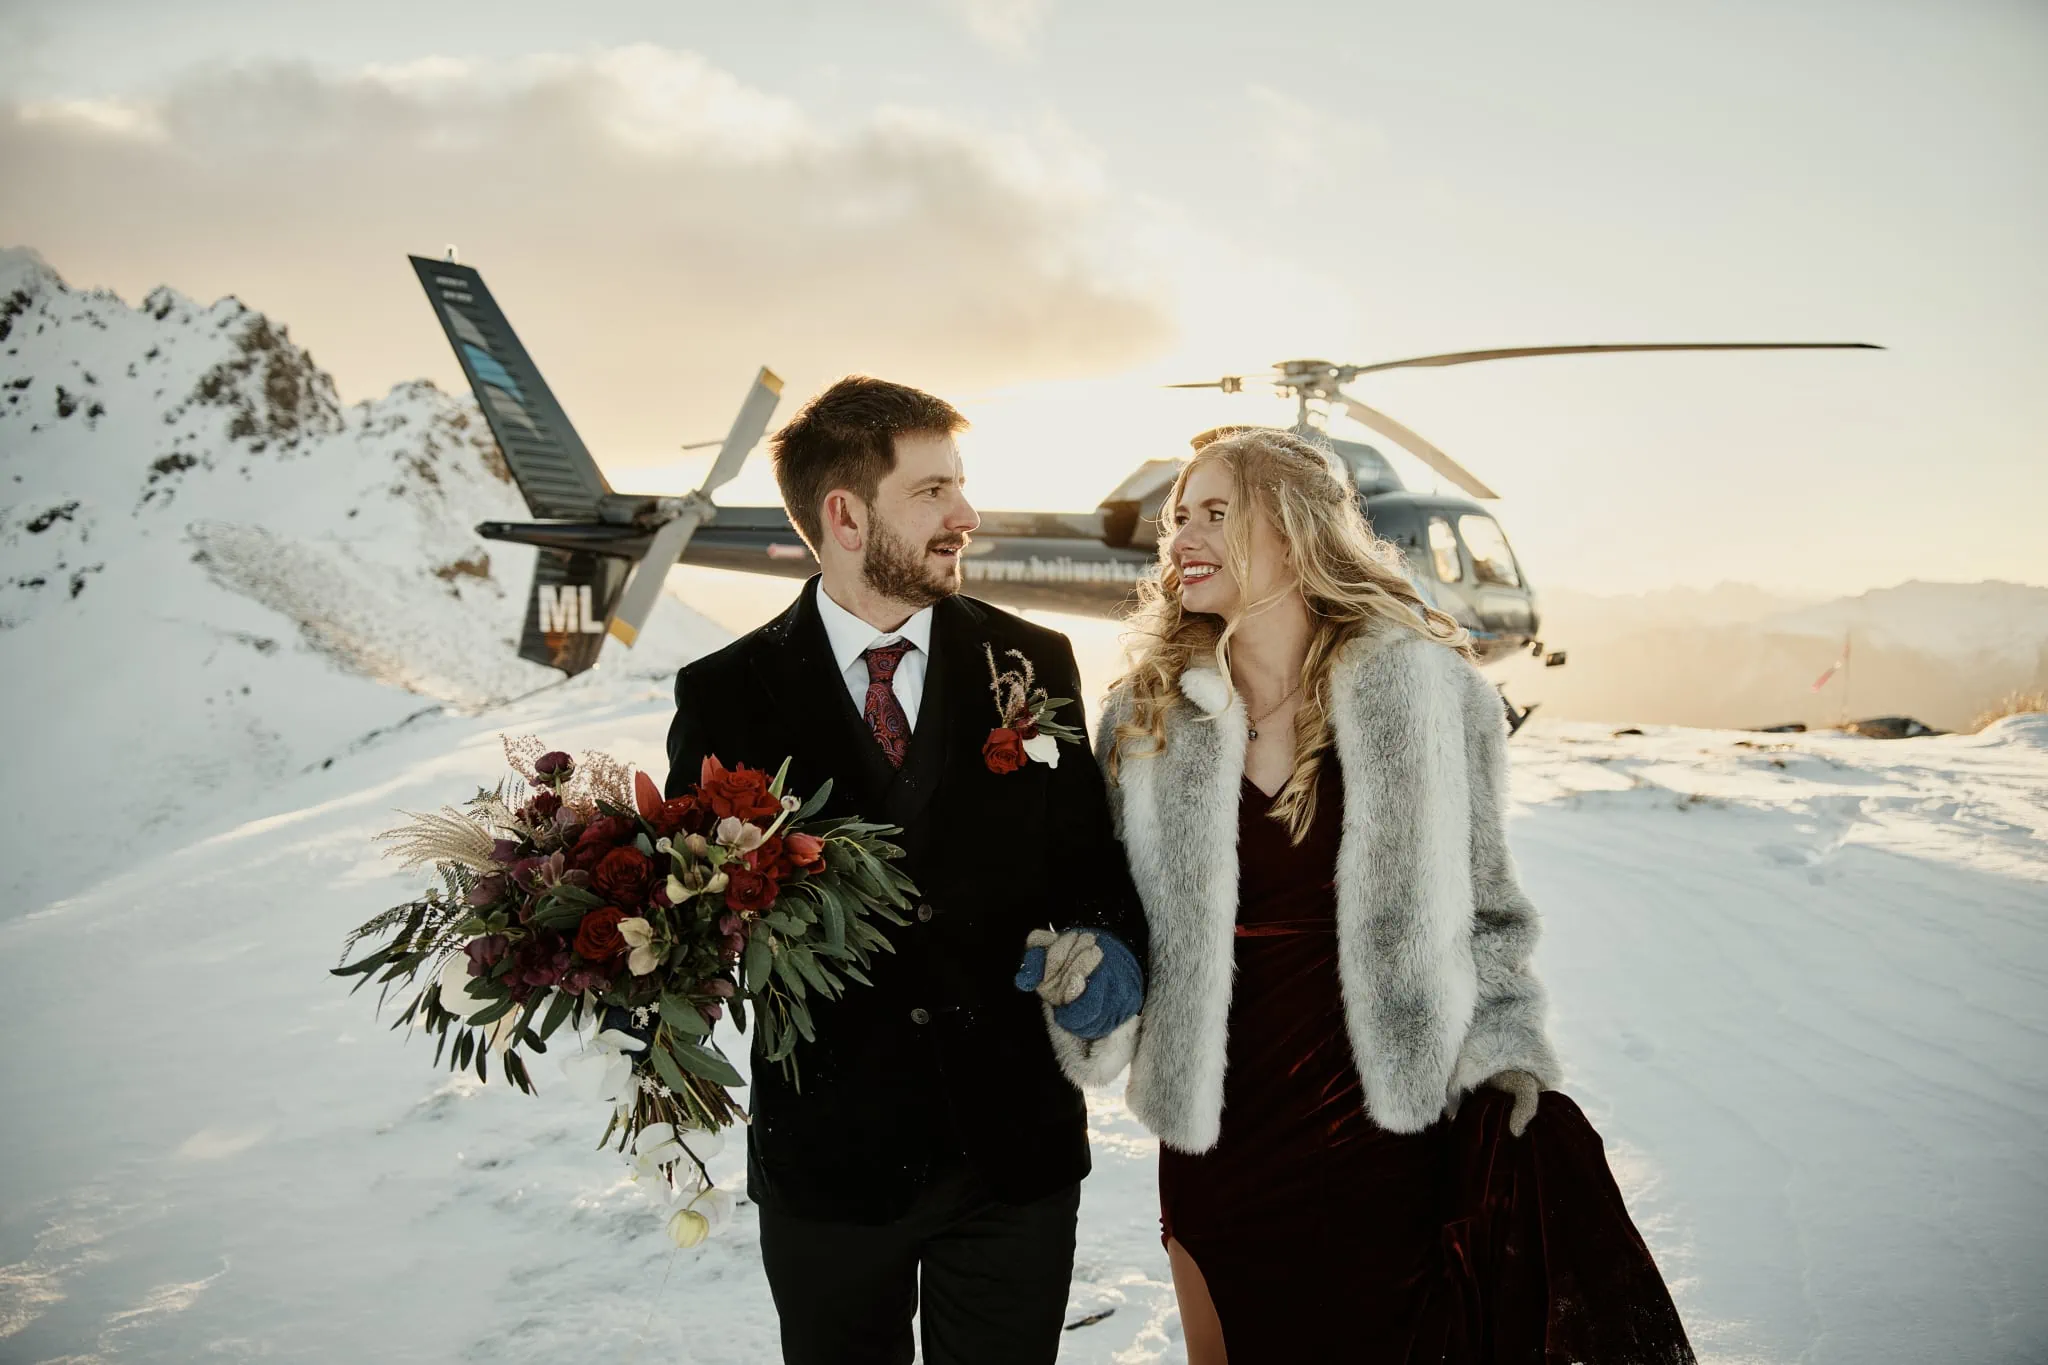 Claire and Rob's heli elopement wedding at Cecil Peak captures a bride and groom standing in front of a helicopter.